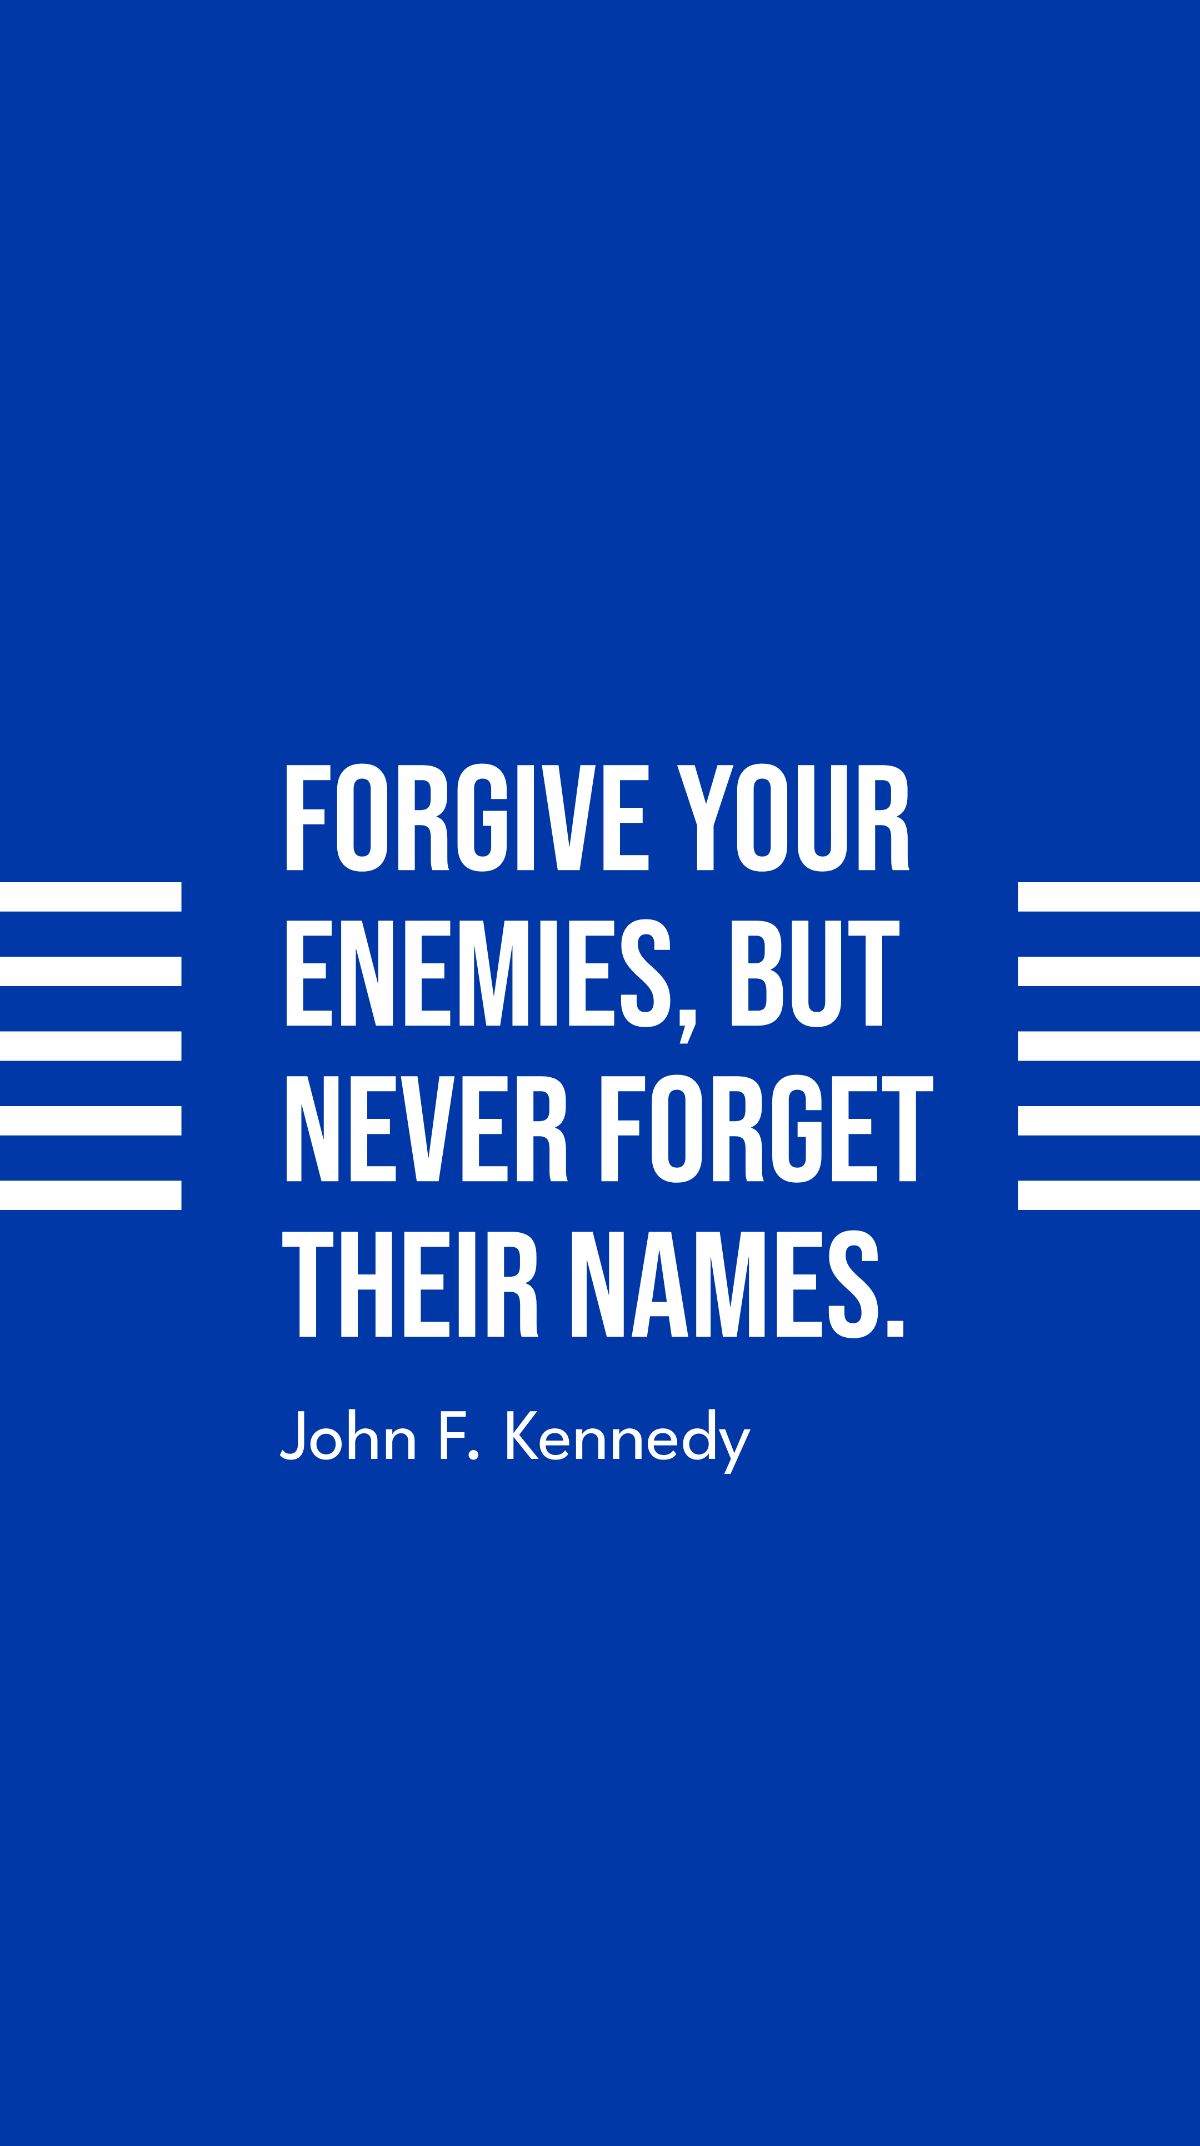 Free John F. Kennedy - Forgive your enemies, but never forget their names. Template